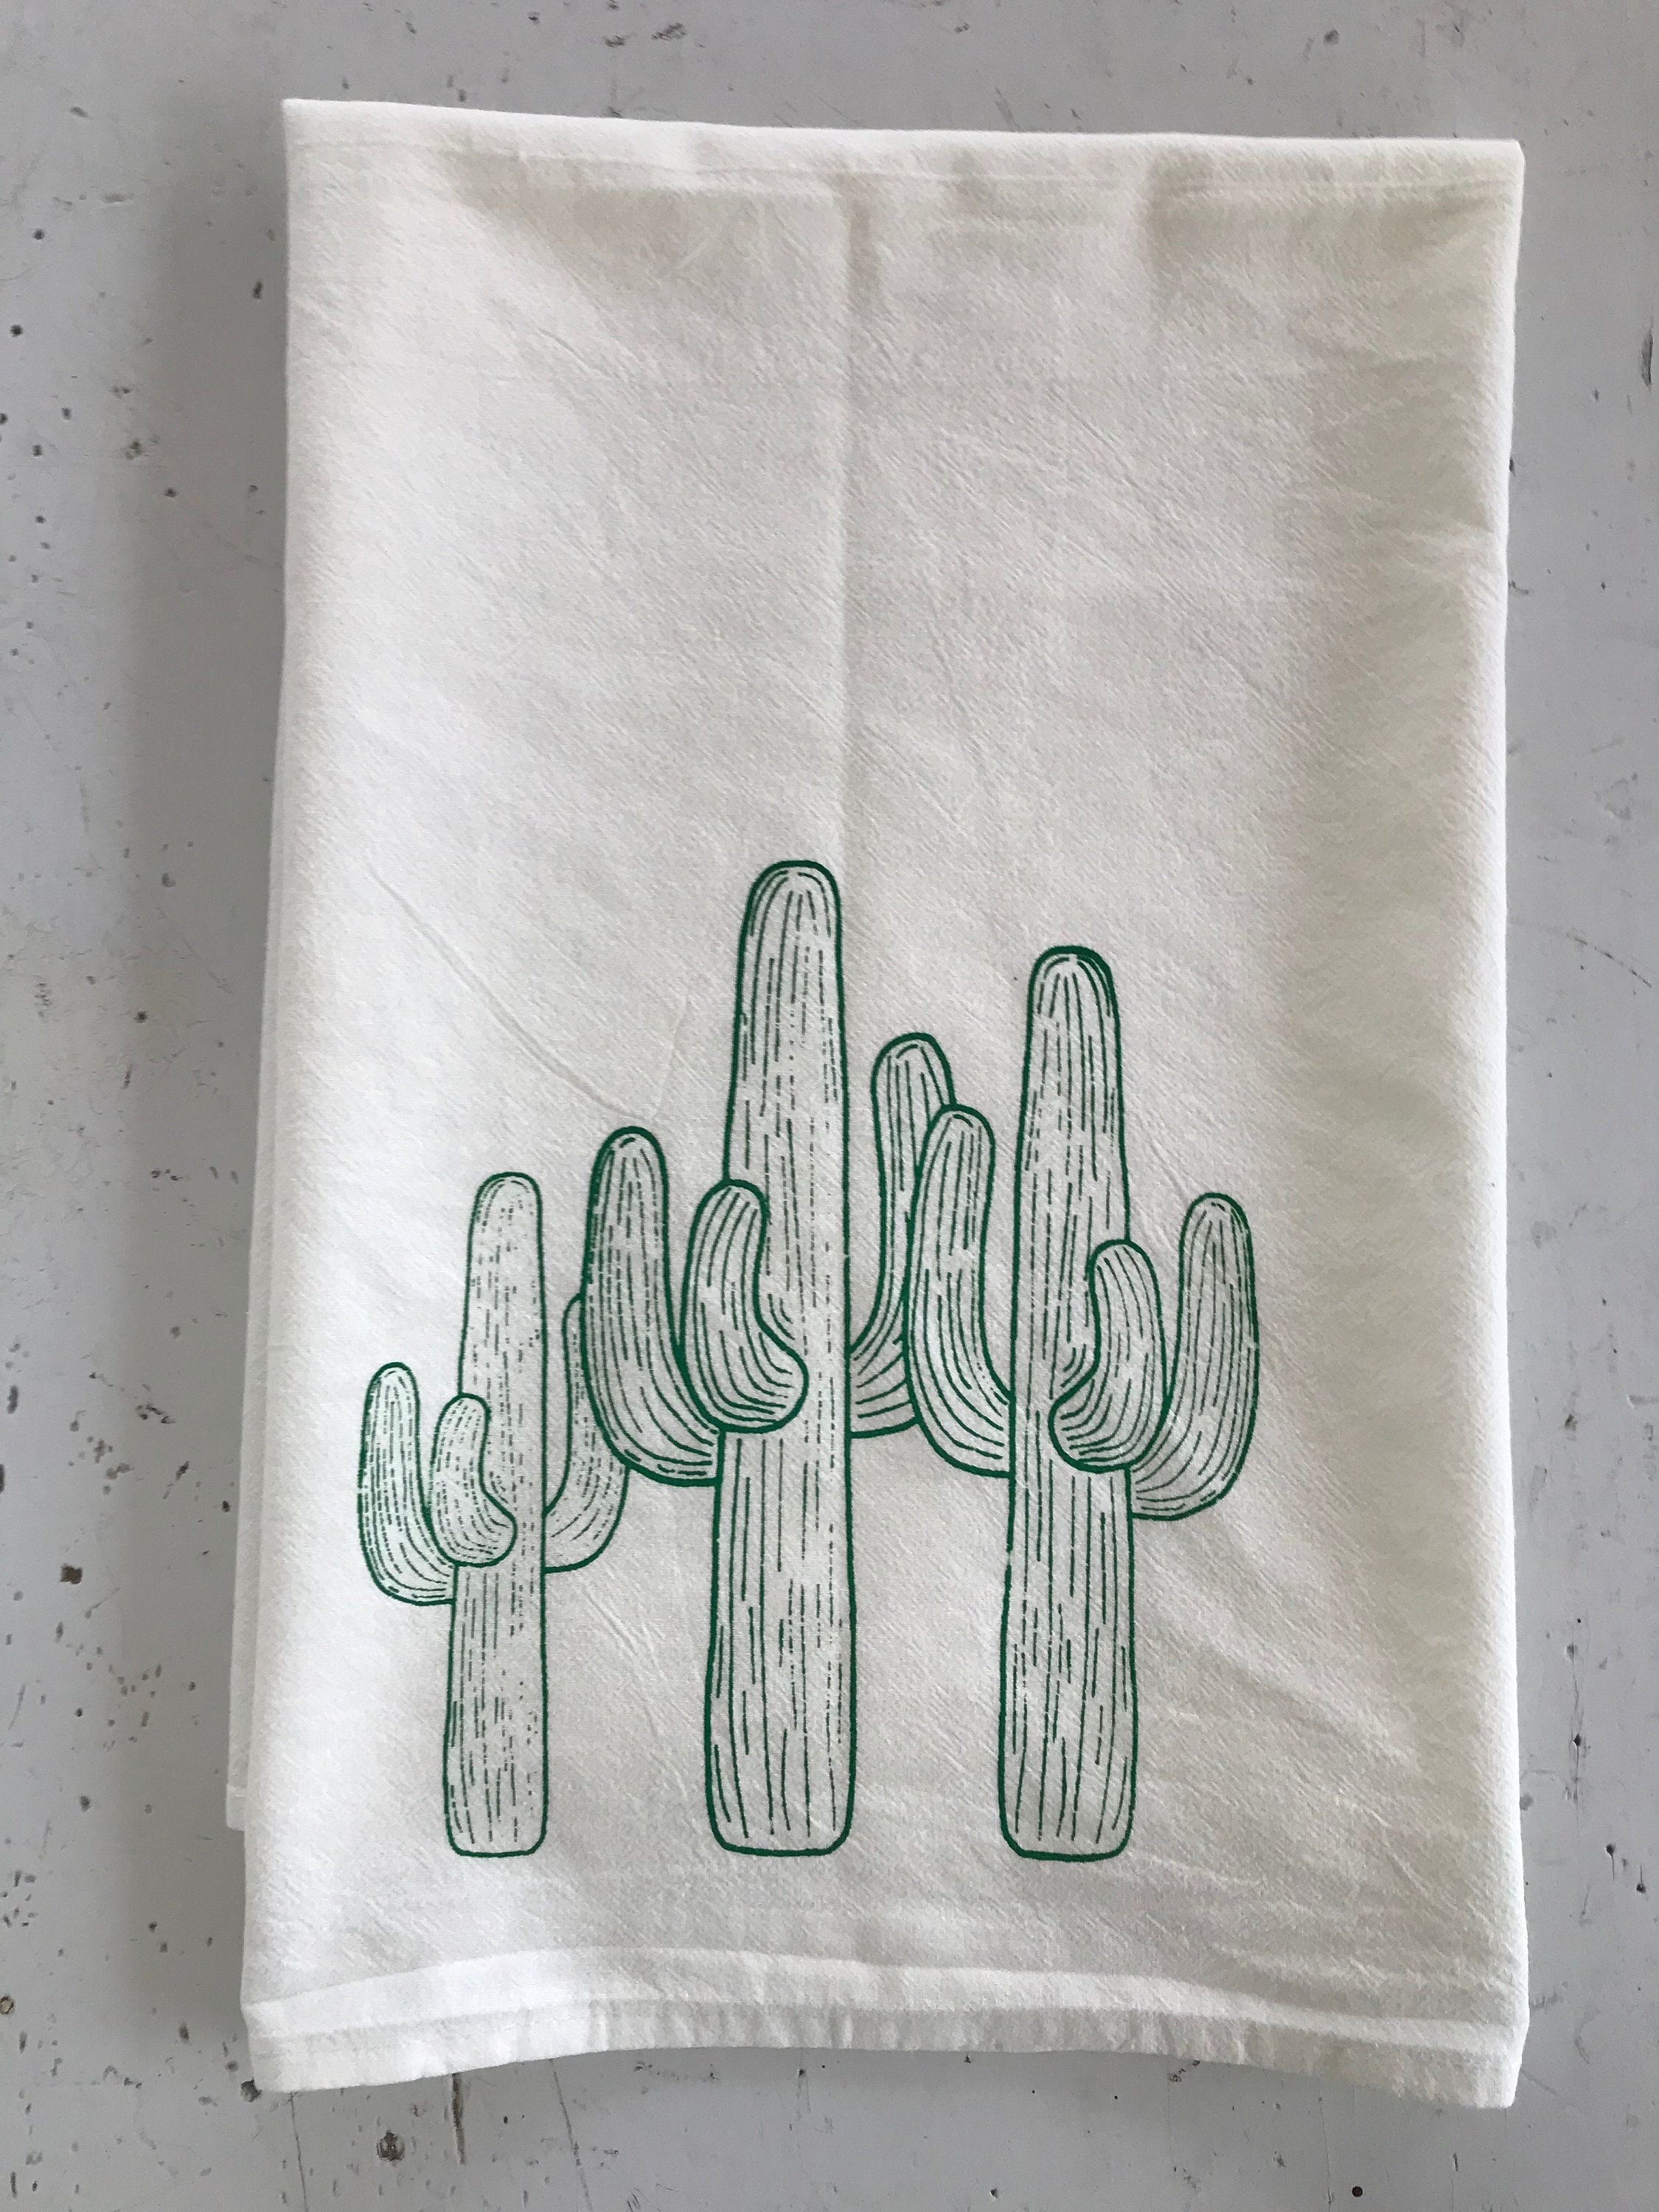 Navajo Cactus Embroidered Hand Towels | Set of 2